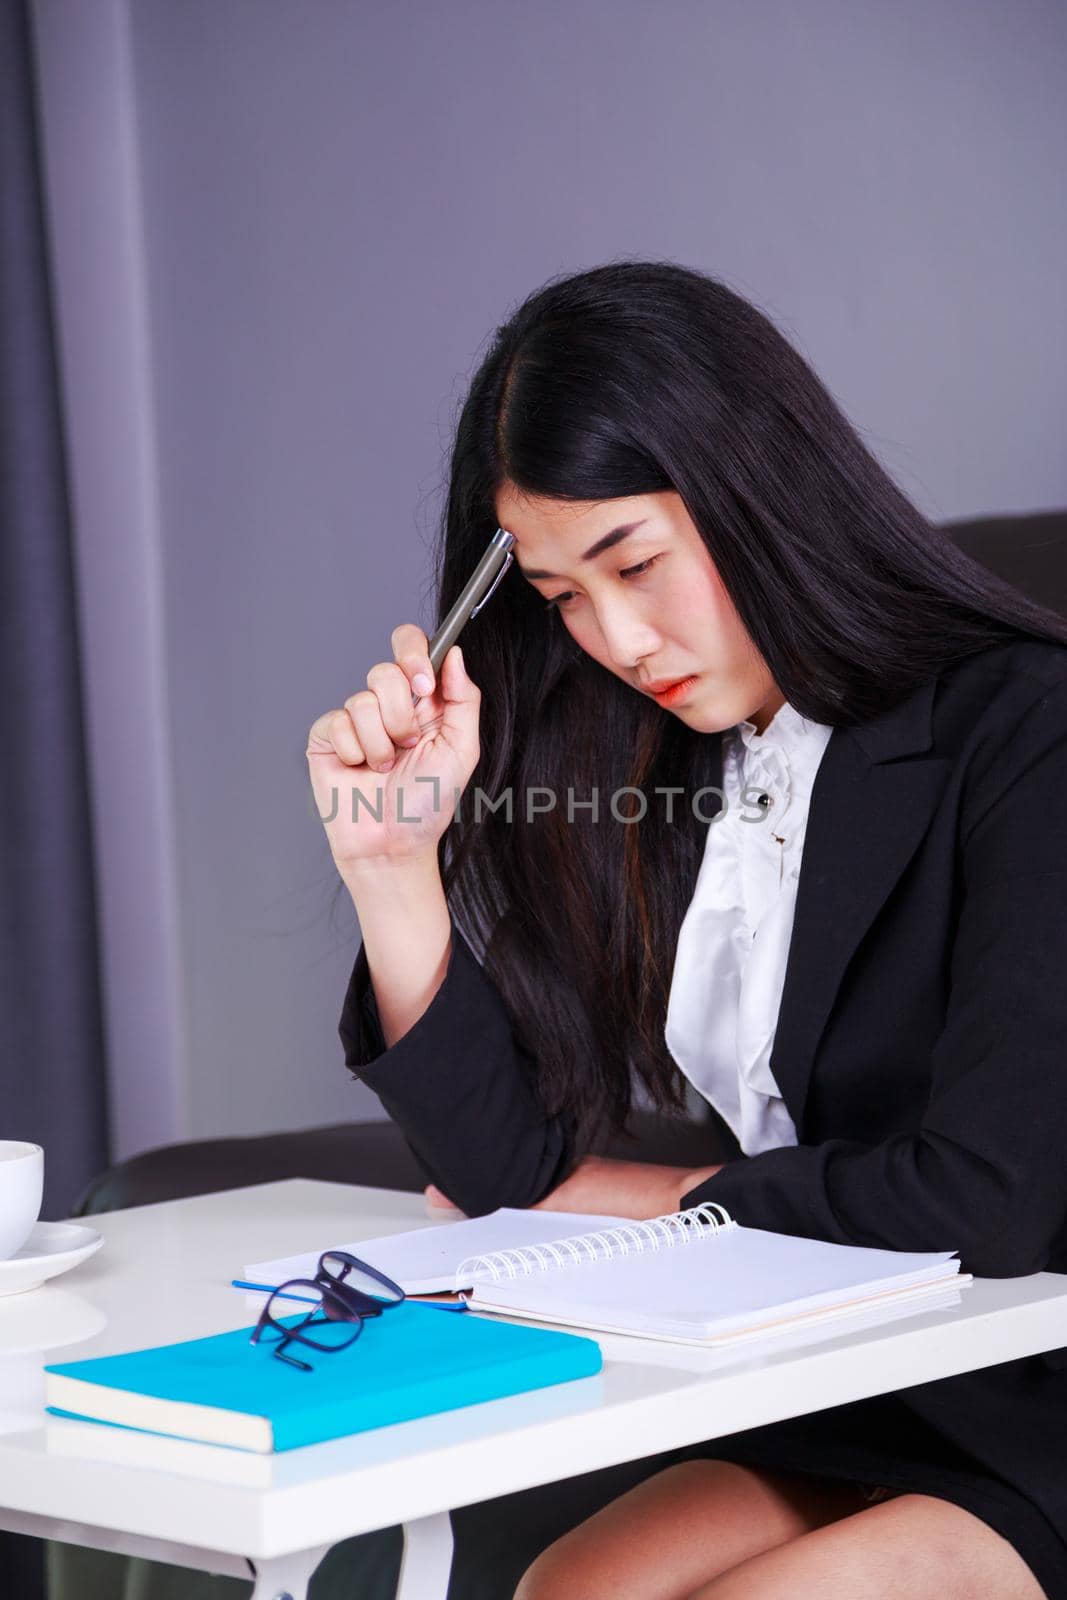 young business woman sitting at the desk and thinking to her work